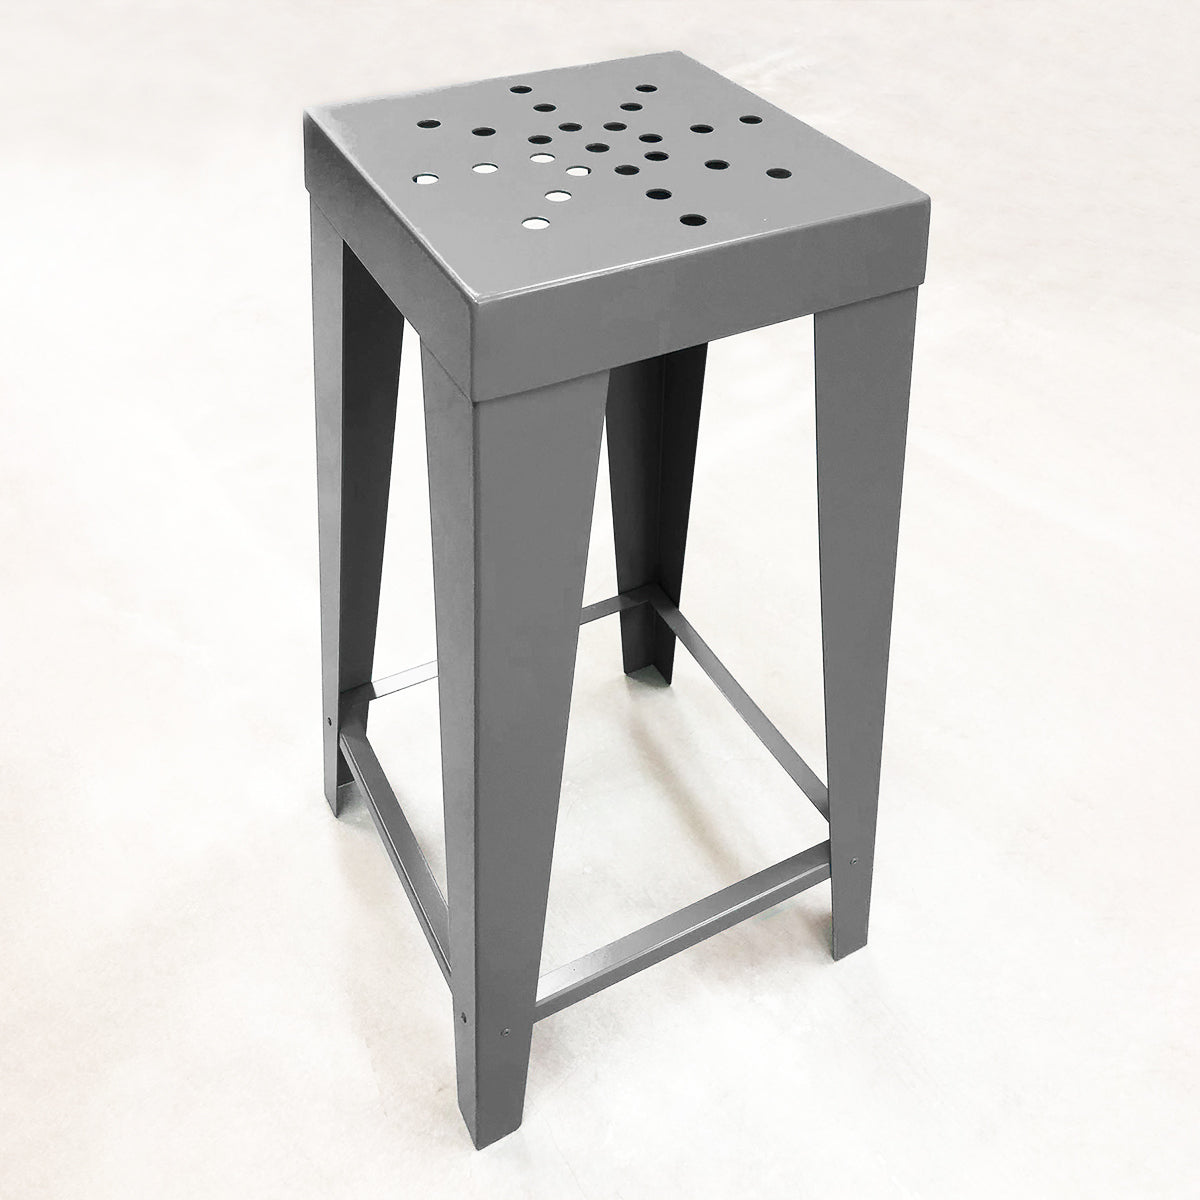 Funky Compact Steel Bar Stool (11 Colours Available) | Indoor Outdoors